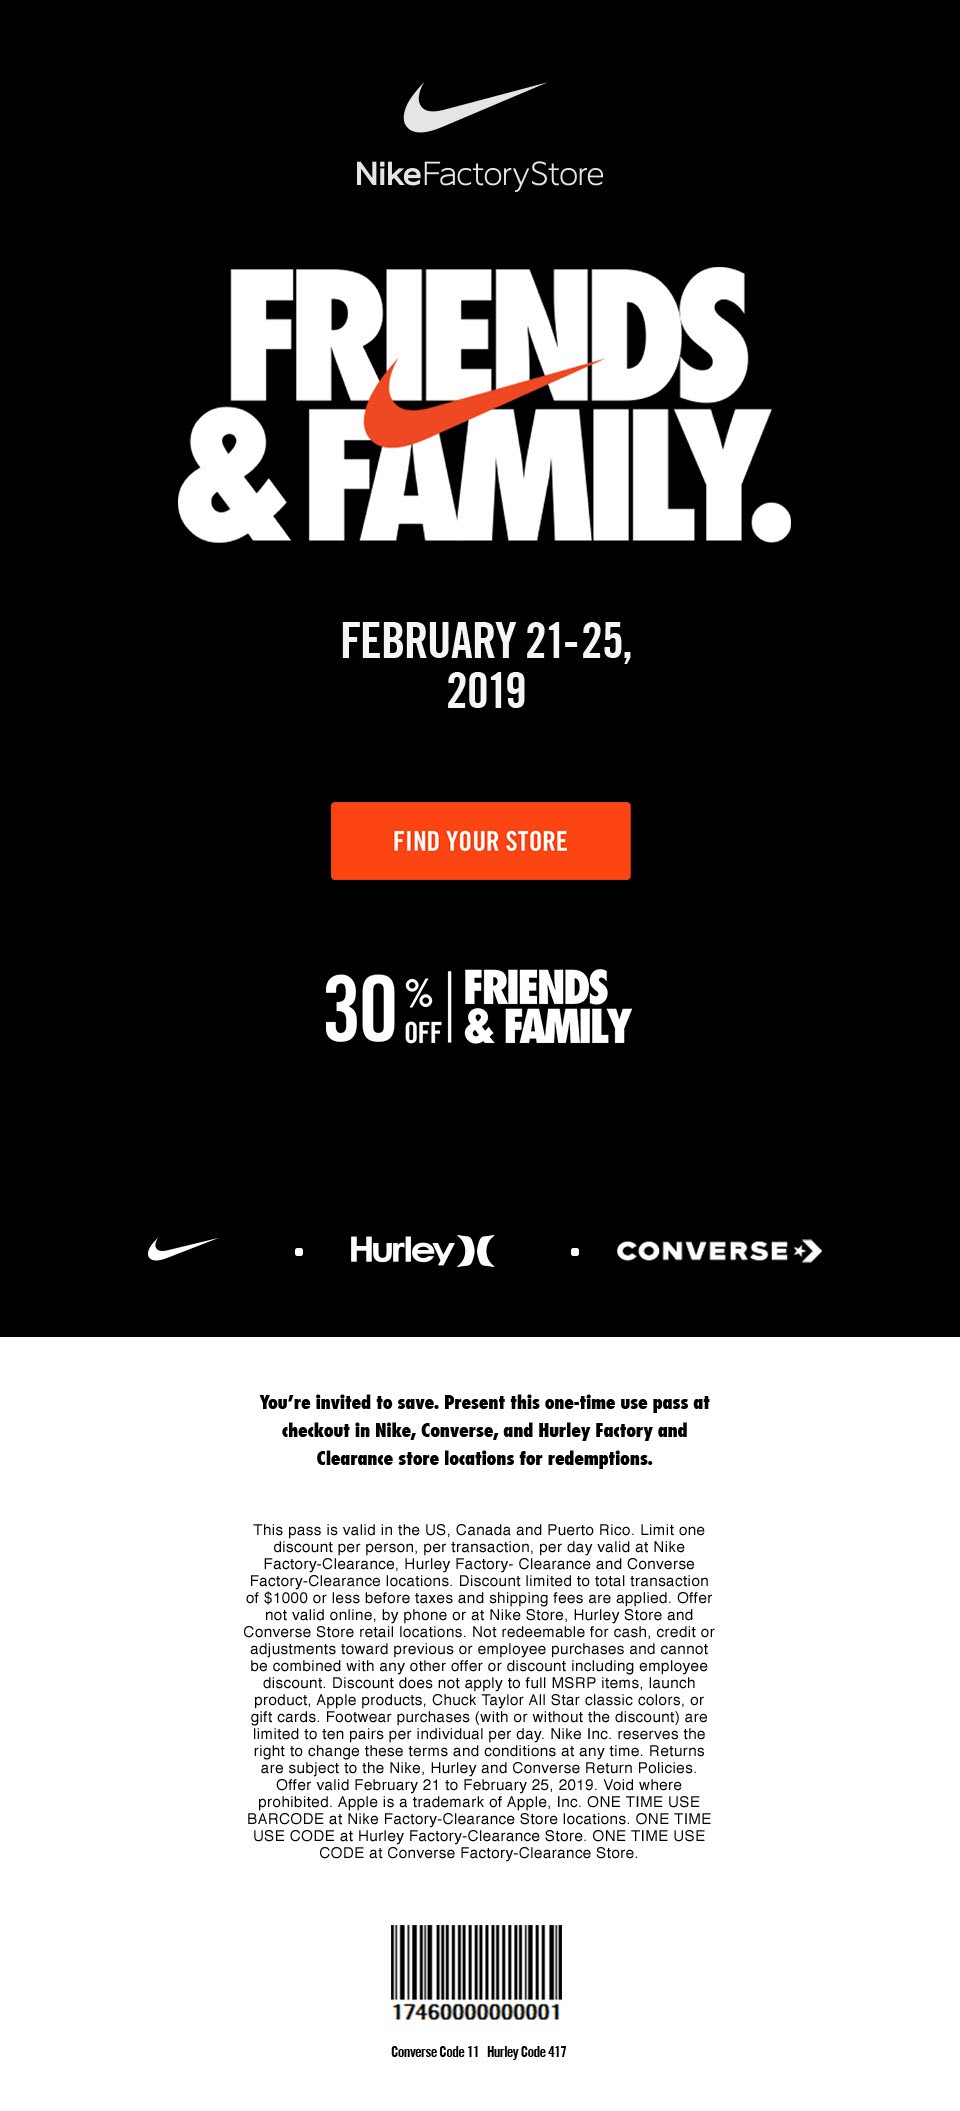 nike factory friends and family 2019